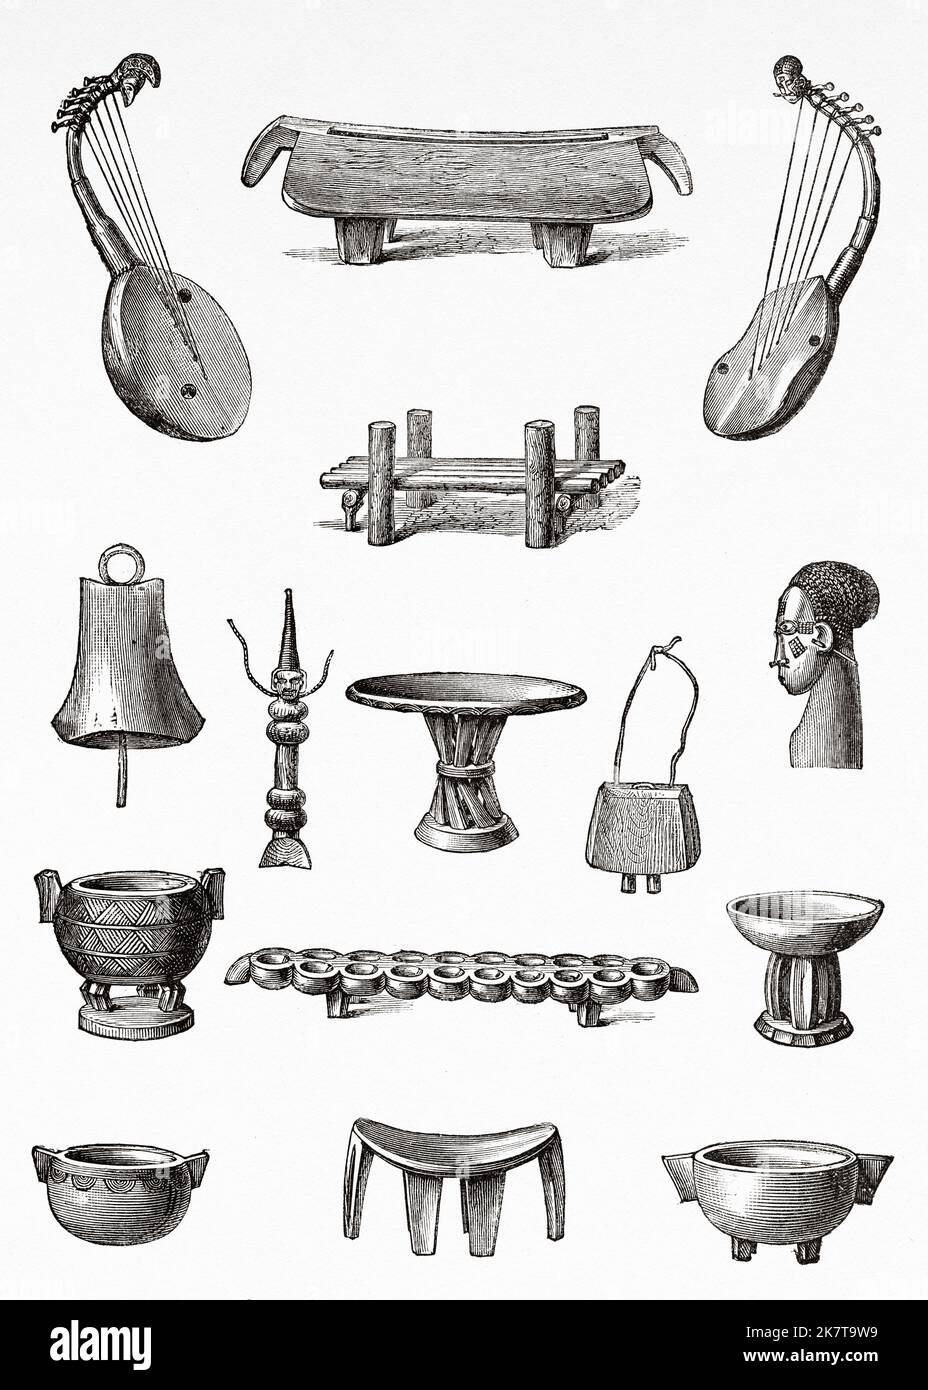 Traditional musical instruments and small utensils of the Zande people, Democratic Republic of the Congo. Africa. Heart of Africa Three years travels and adventures in the unexplored regions of Central Africa by Georg August Schweinfurth, 1868-1871 Stock Photo